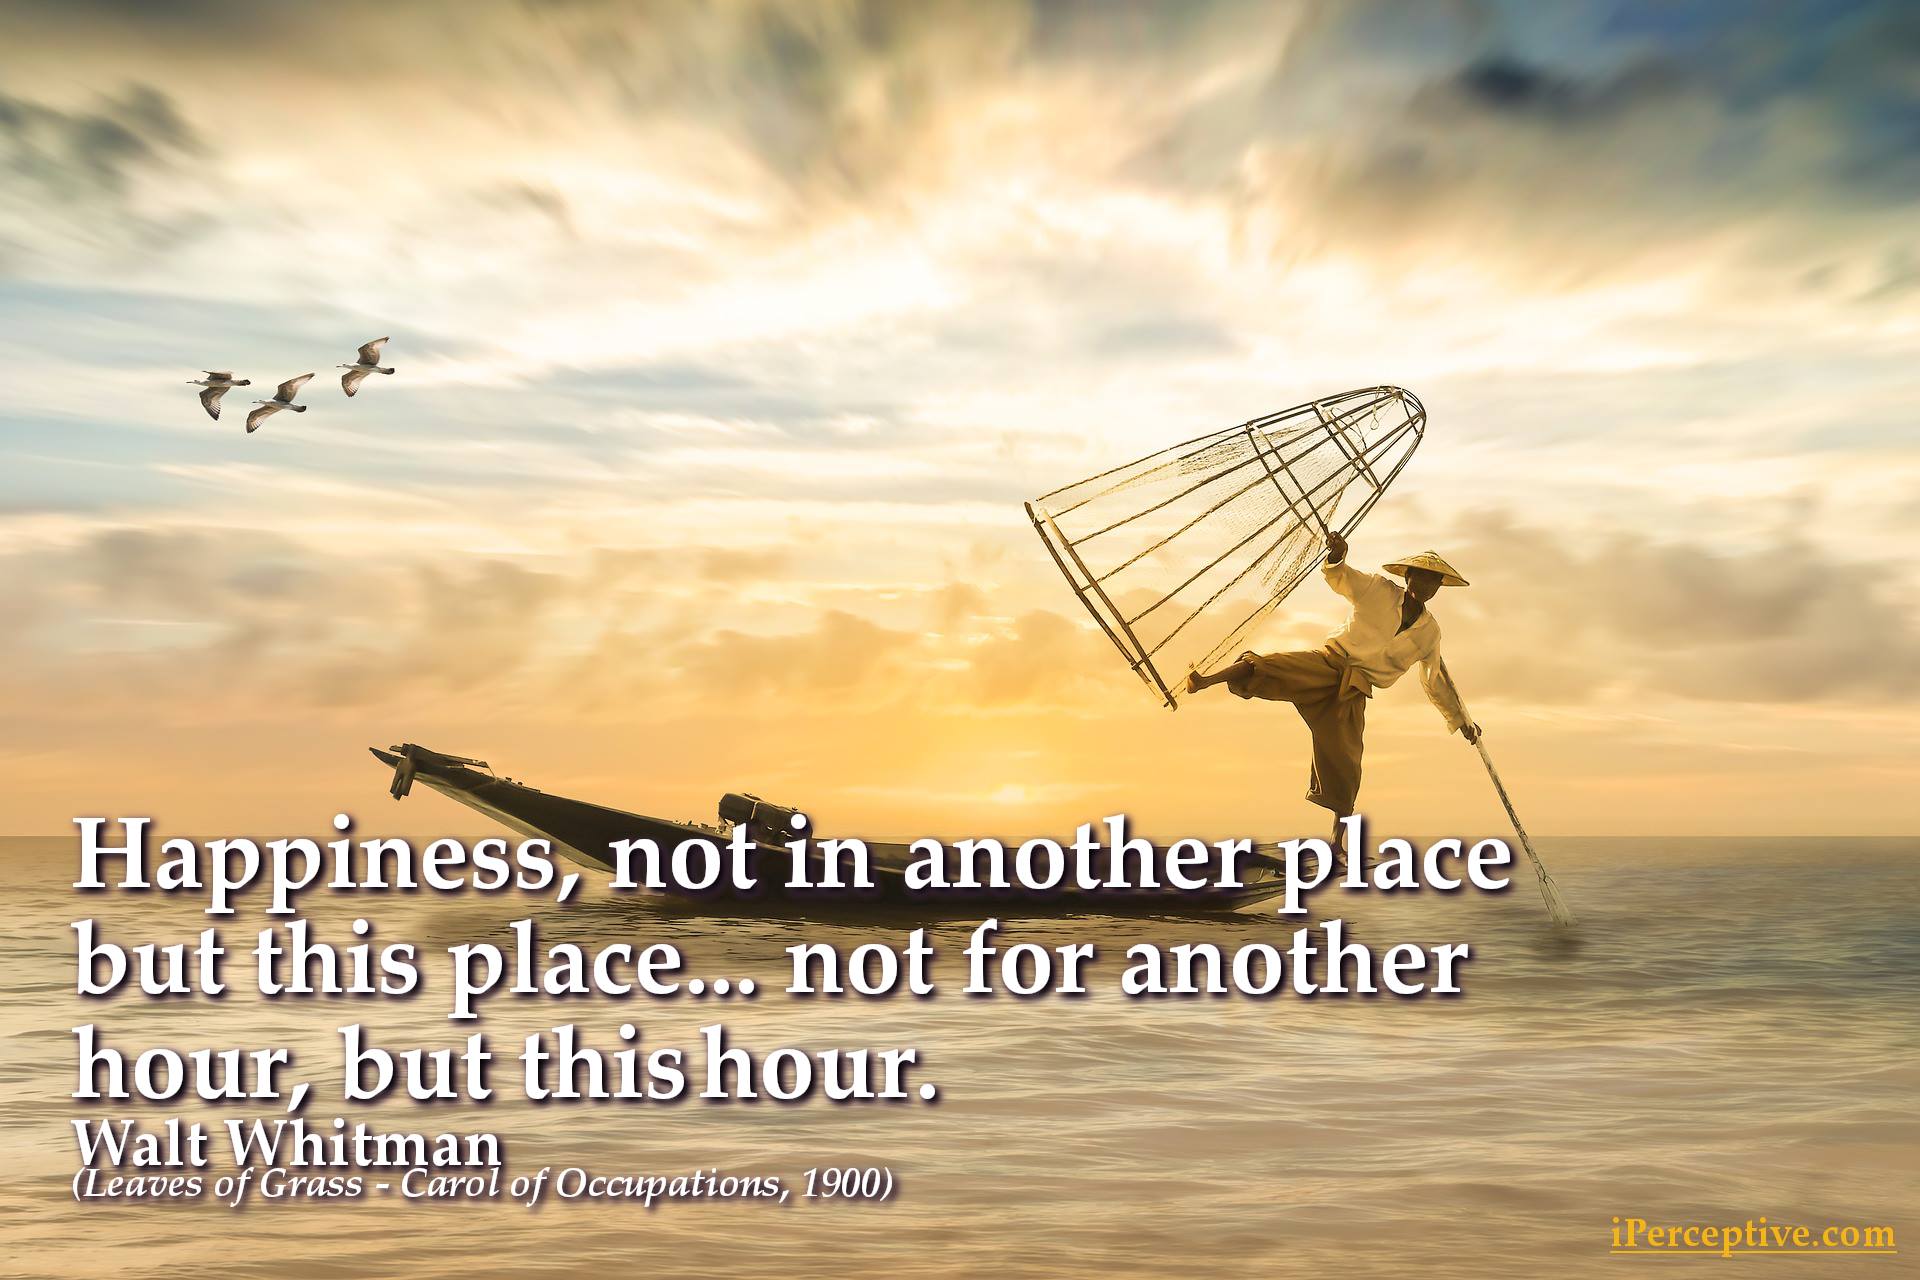 Walt Whitman Happiness Quote: Happiness, not in another place but this place ...